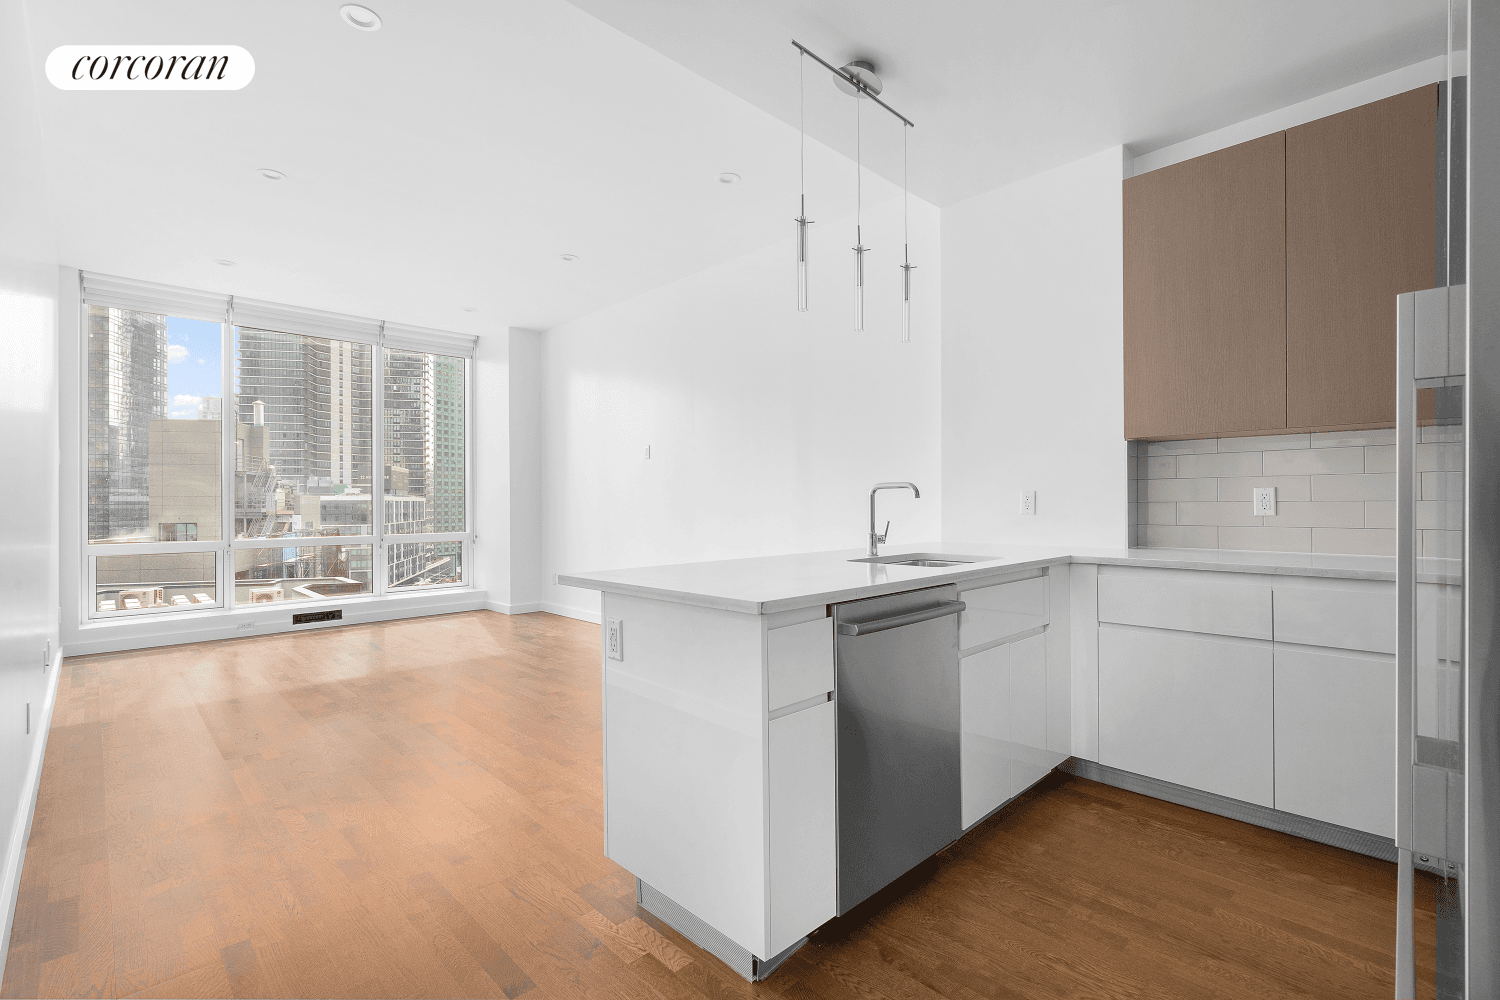 This 1 bedroom spacious apartment features ample natural light, an open floor plan, and modern finishes throughout.